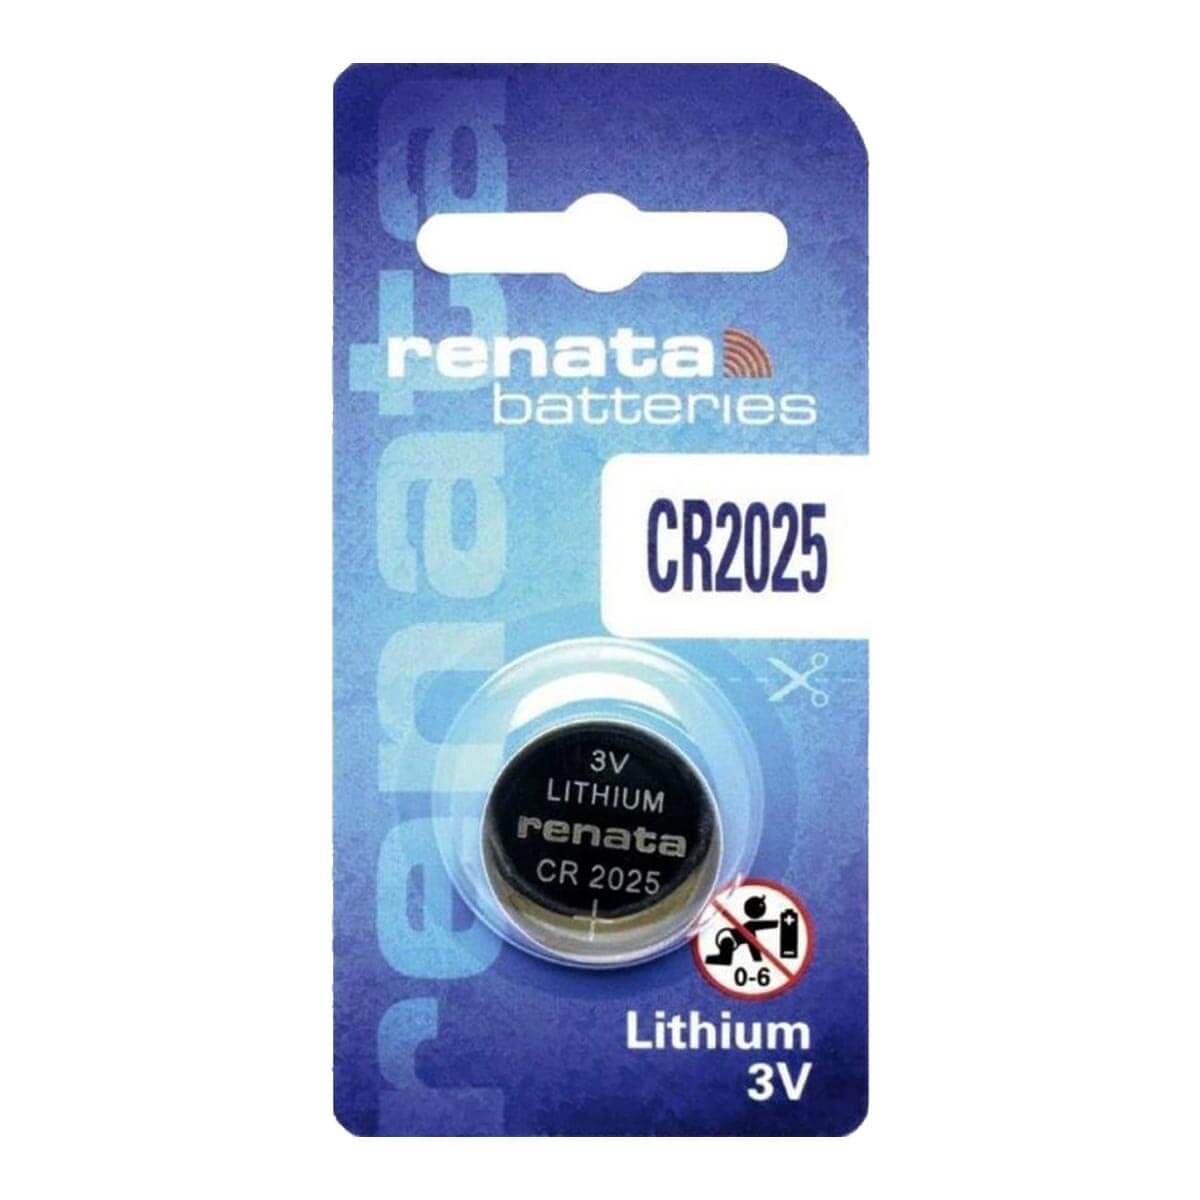 CR2025 Remote Battery Batteries for Remotes